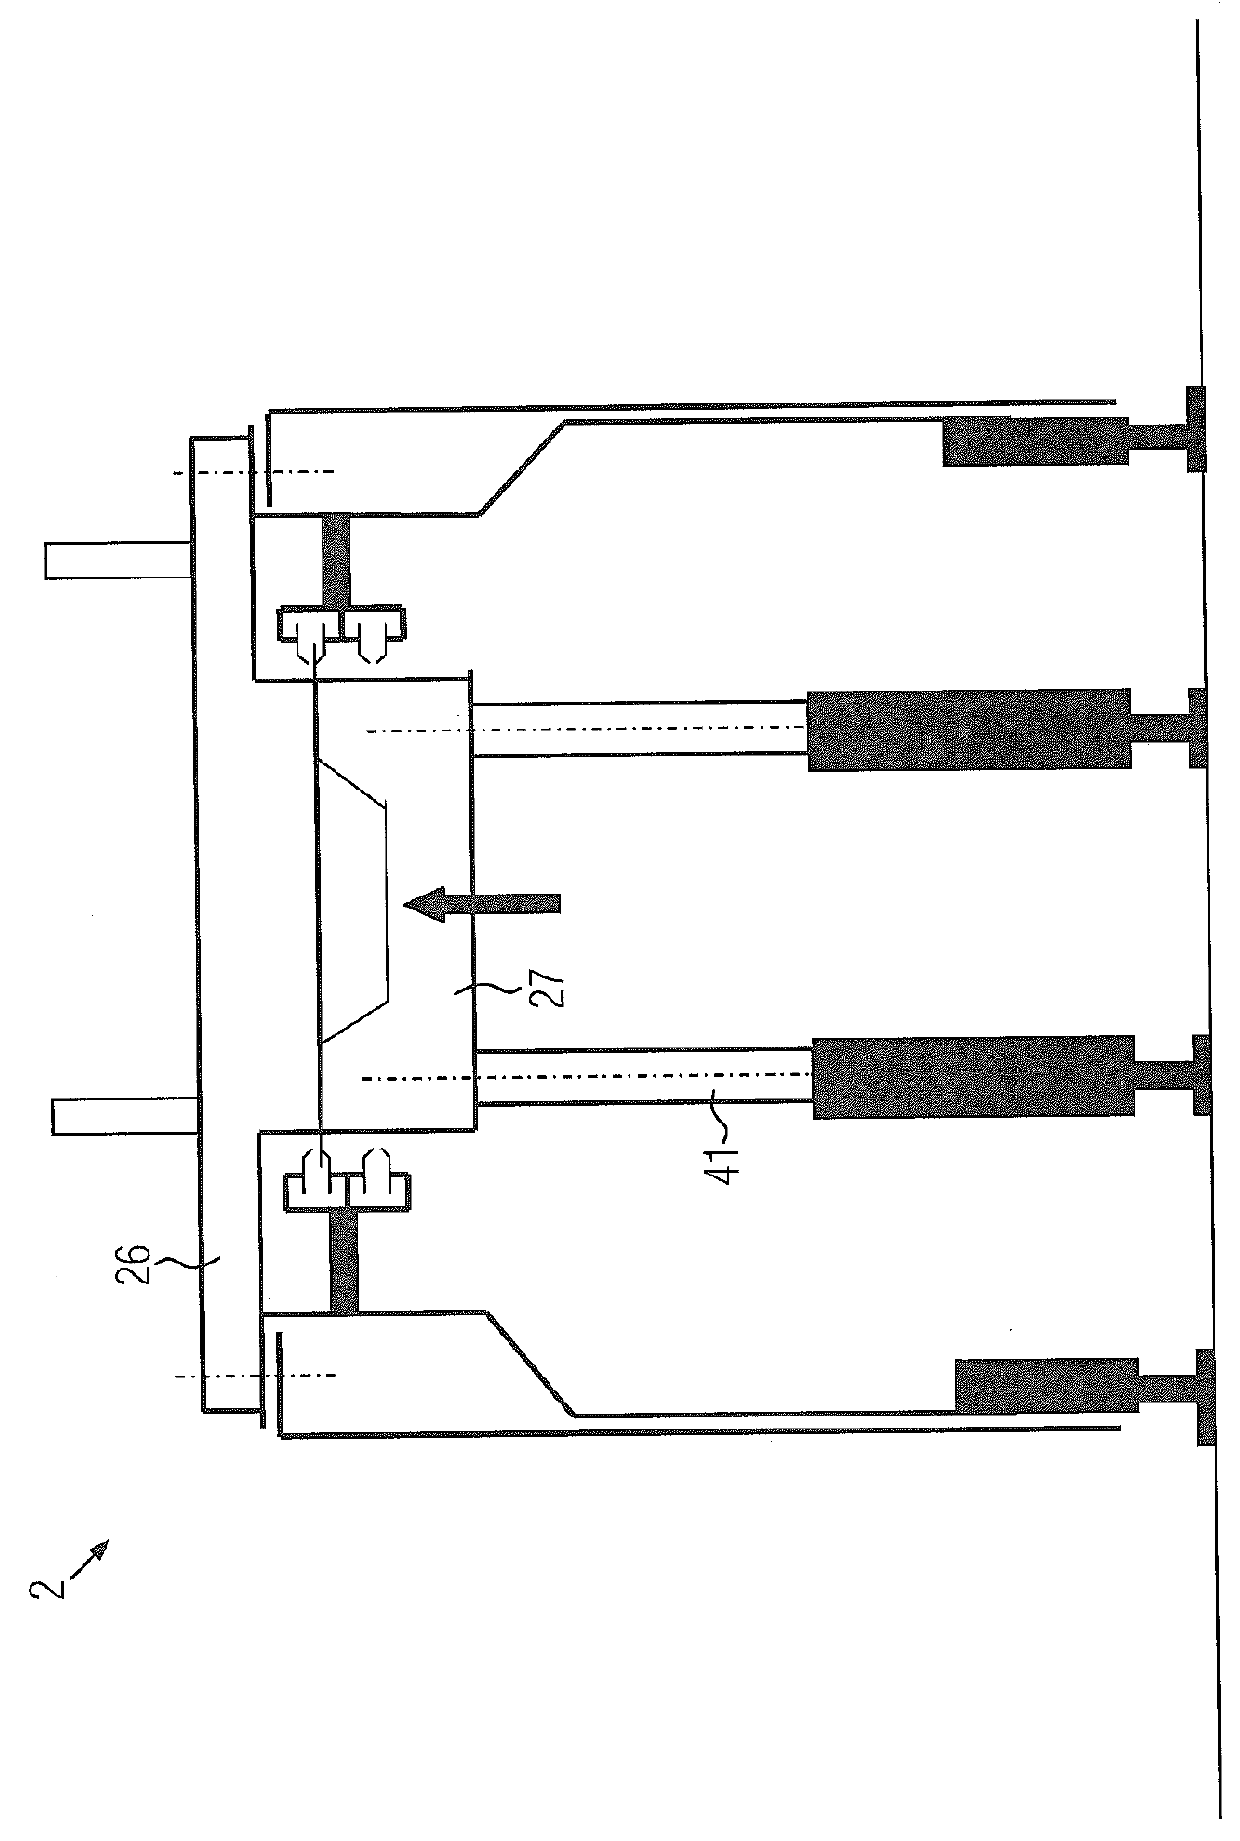 Work station for a packaging machine and tool changing method